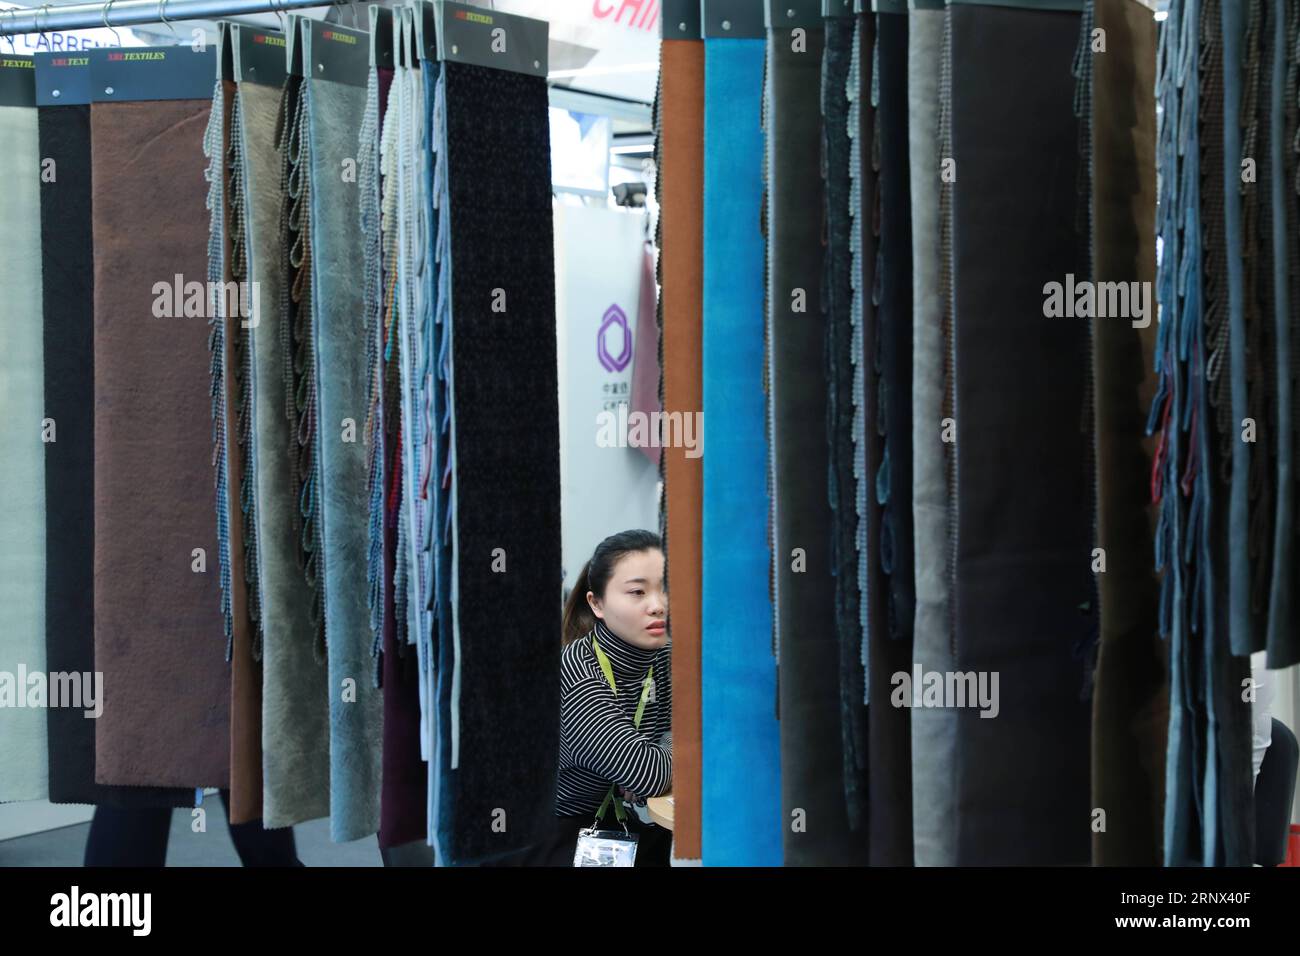 (180112) -- FRANKFURT, Jan. 12, 2018 -- A worker sits at a Chinese textile booth at Heimtextil, the world s largest international trade fair for home and contract textiles, in Frankfurt, Germany, on Jan. 11, 2018. A total of 2,975 exhibitors from 64 countries and regions attended the trade fair this year, 545 of which are from China. ) (djj) GERMANY-FRANKFURT-HEIMTEXTIL-CHINA LuoxHuanhuan PUBLICATIONxNOTxINxCHN Stock Photo